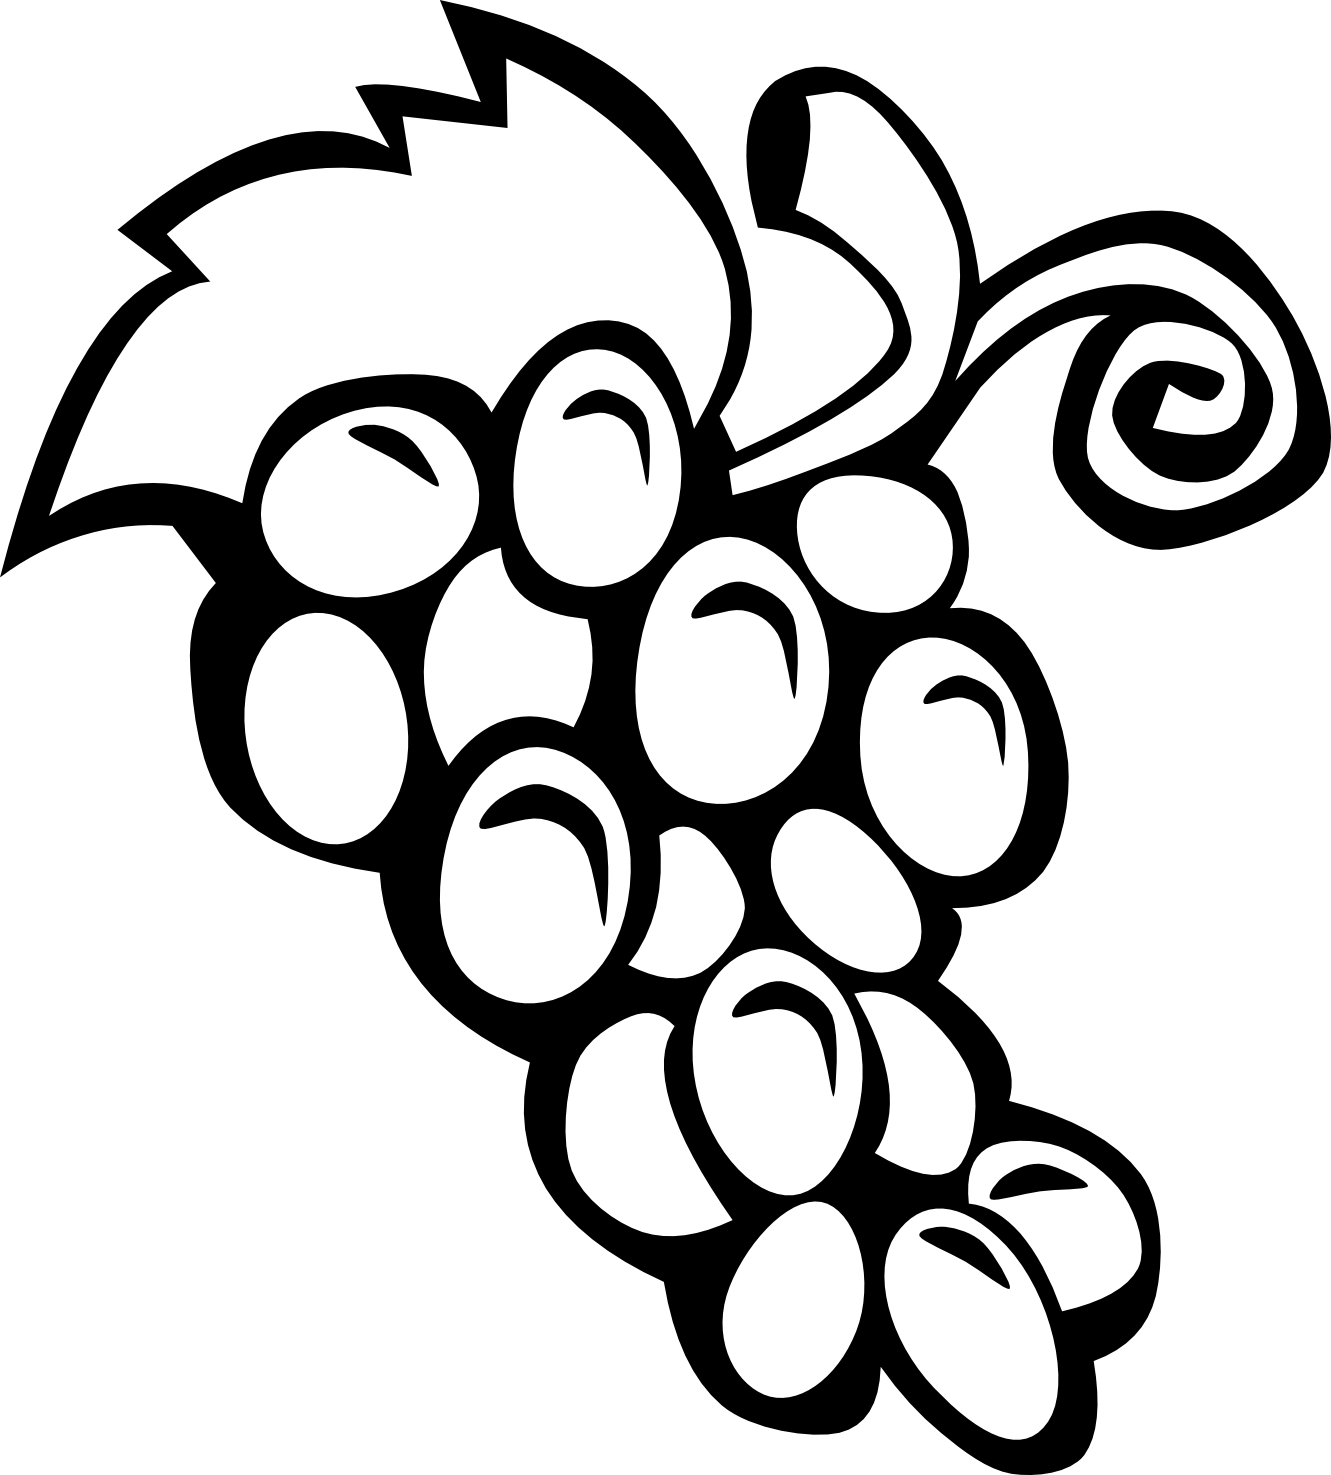 Black And White Fruit Clipart